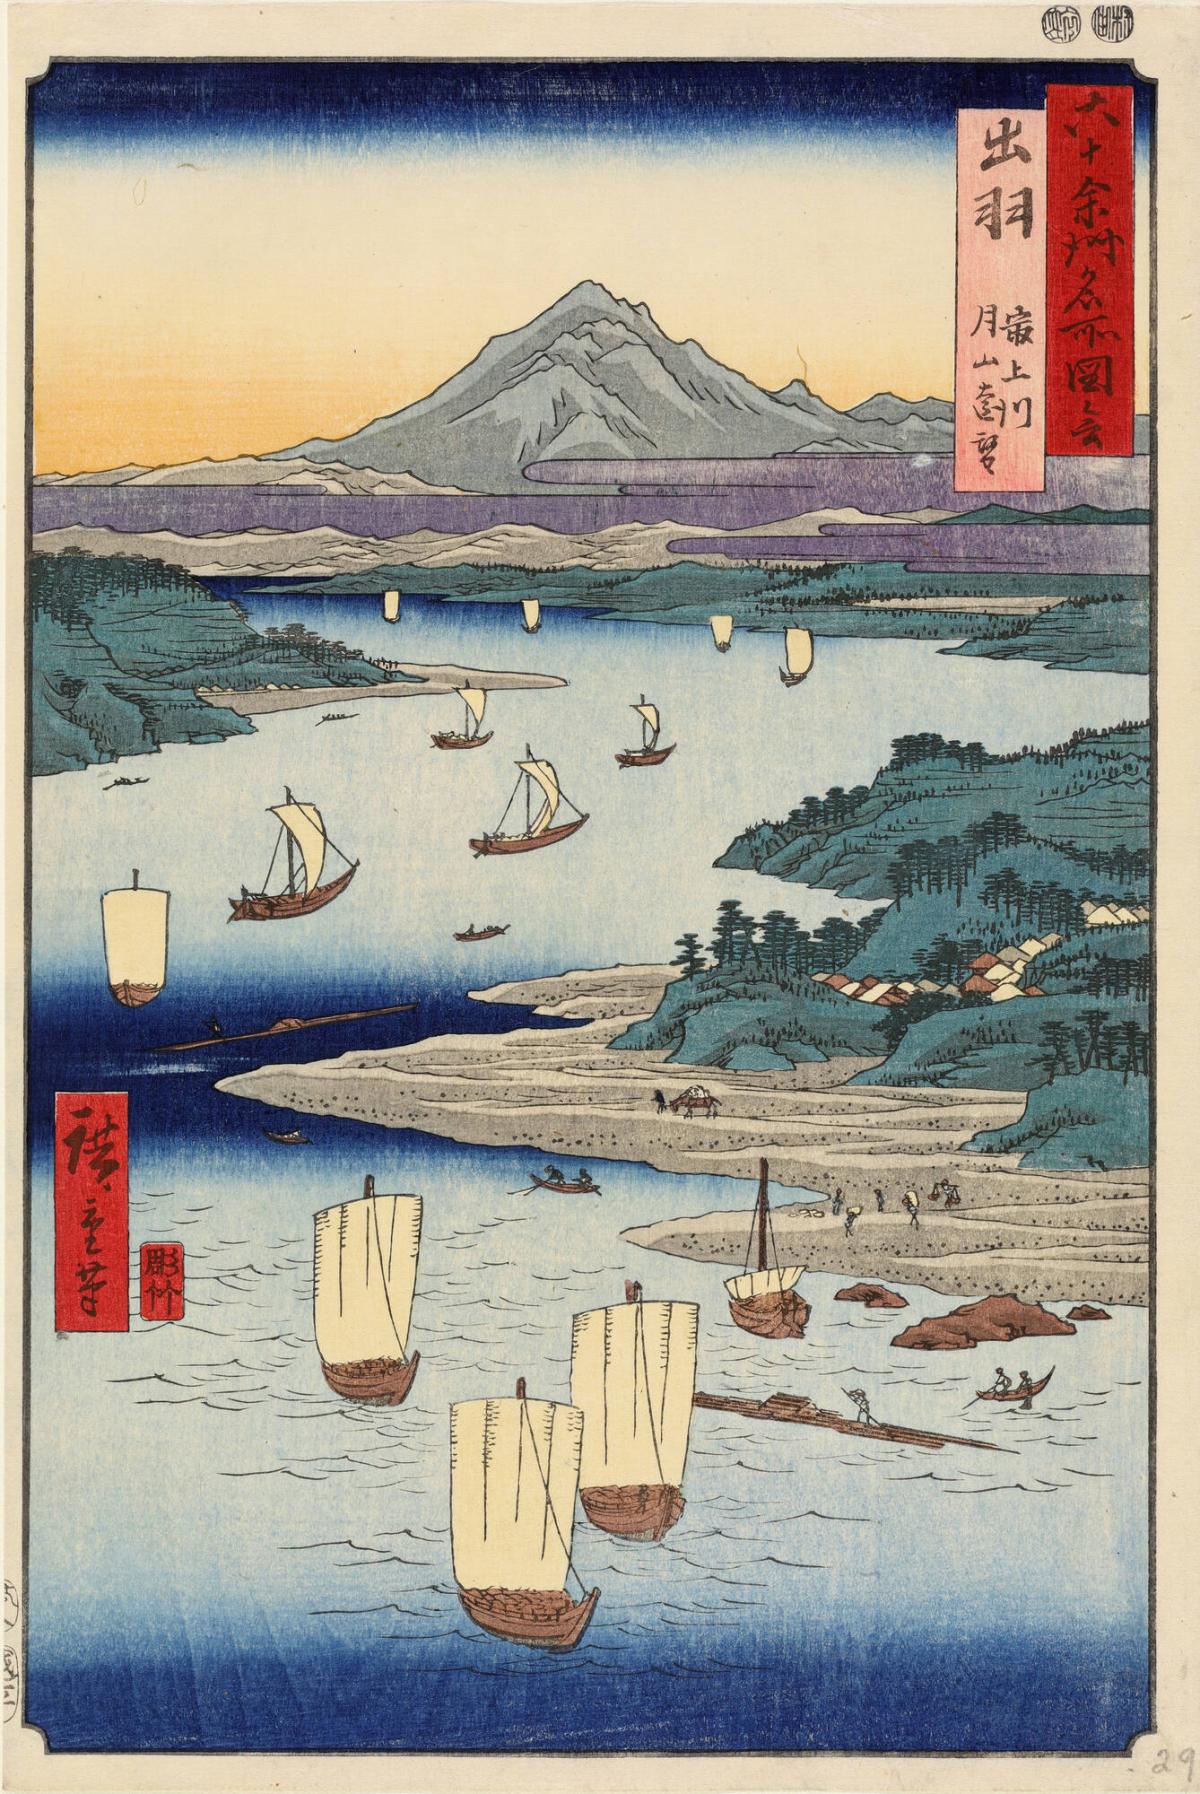 Distant View of Moon Mountain from the Mogami River in Dewa Province, no. 29 from the series Pictures of Famous Places in the Sixty-odd Provinces